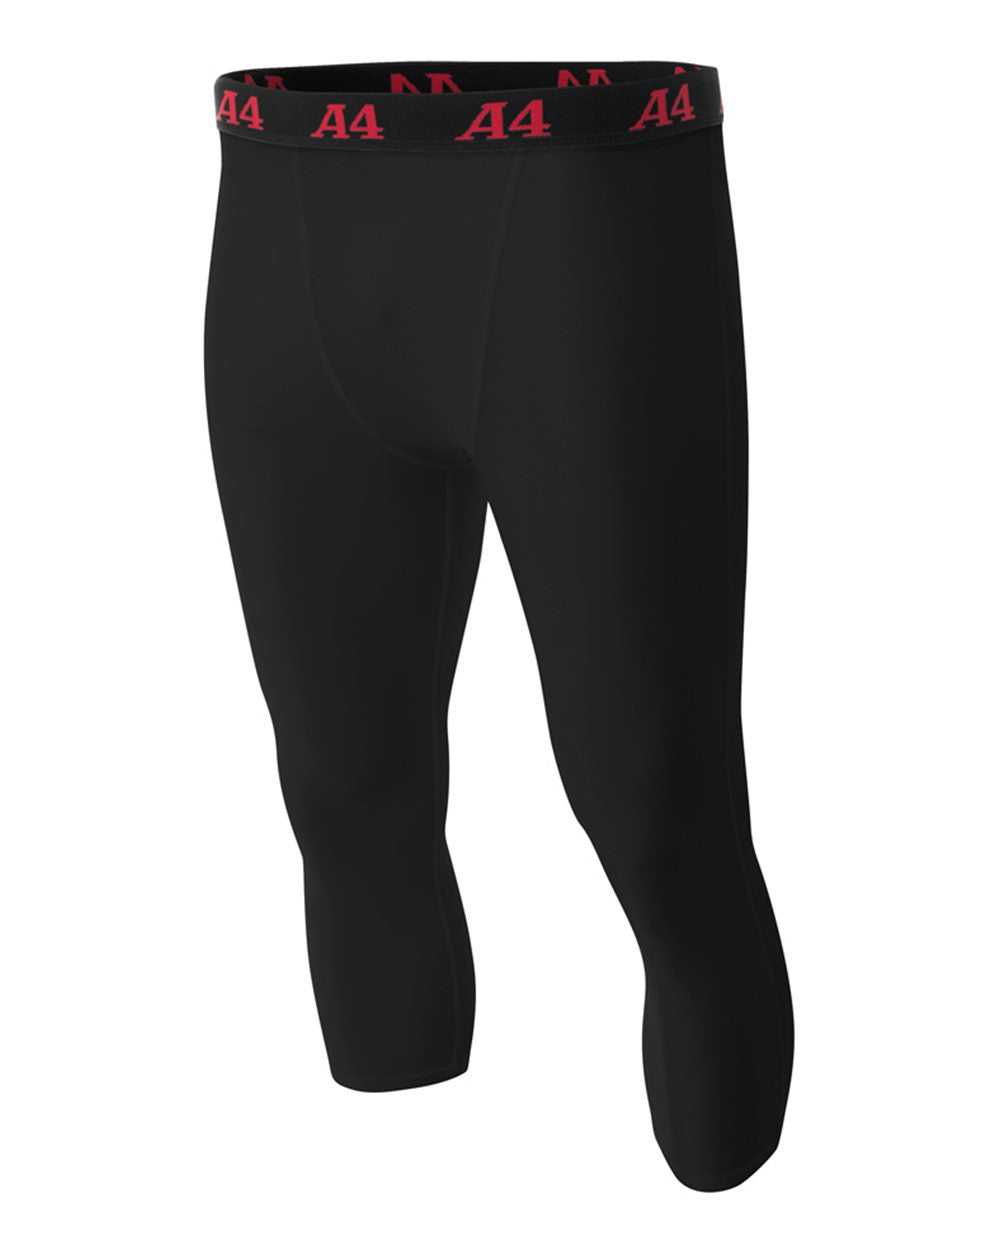 A4 N6202 Compression Tight - Black - HIT a Double